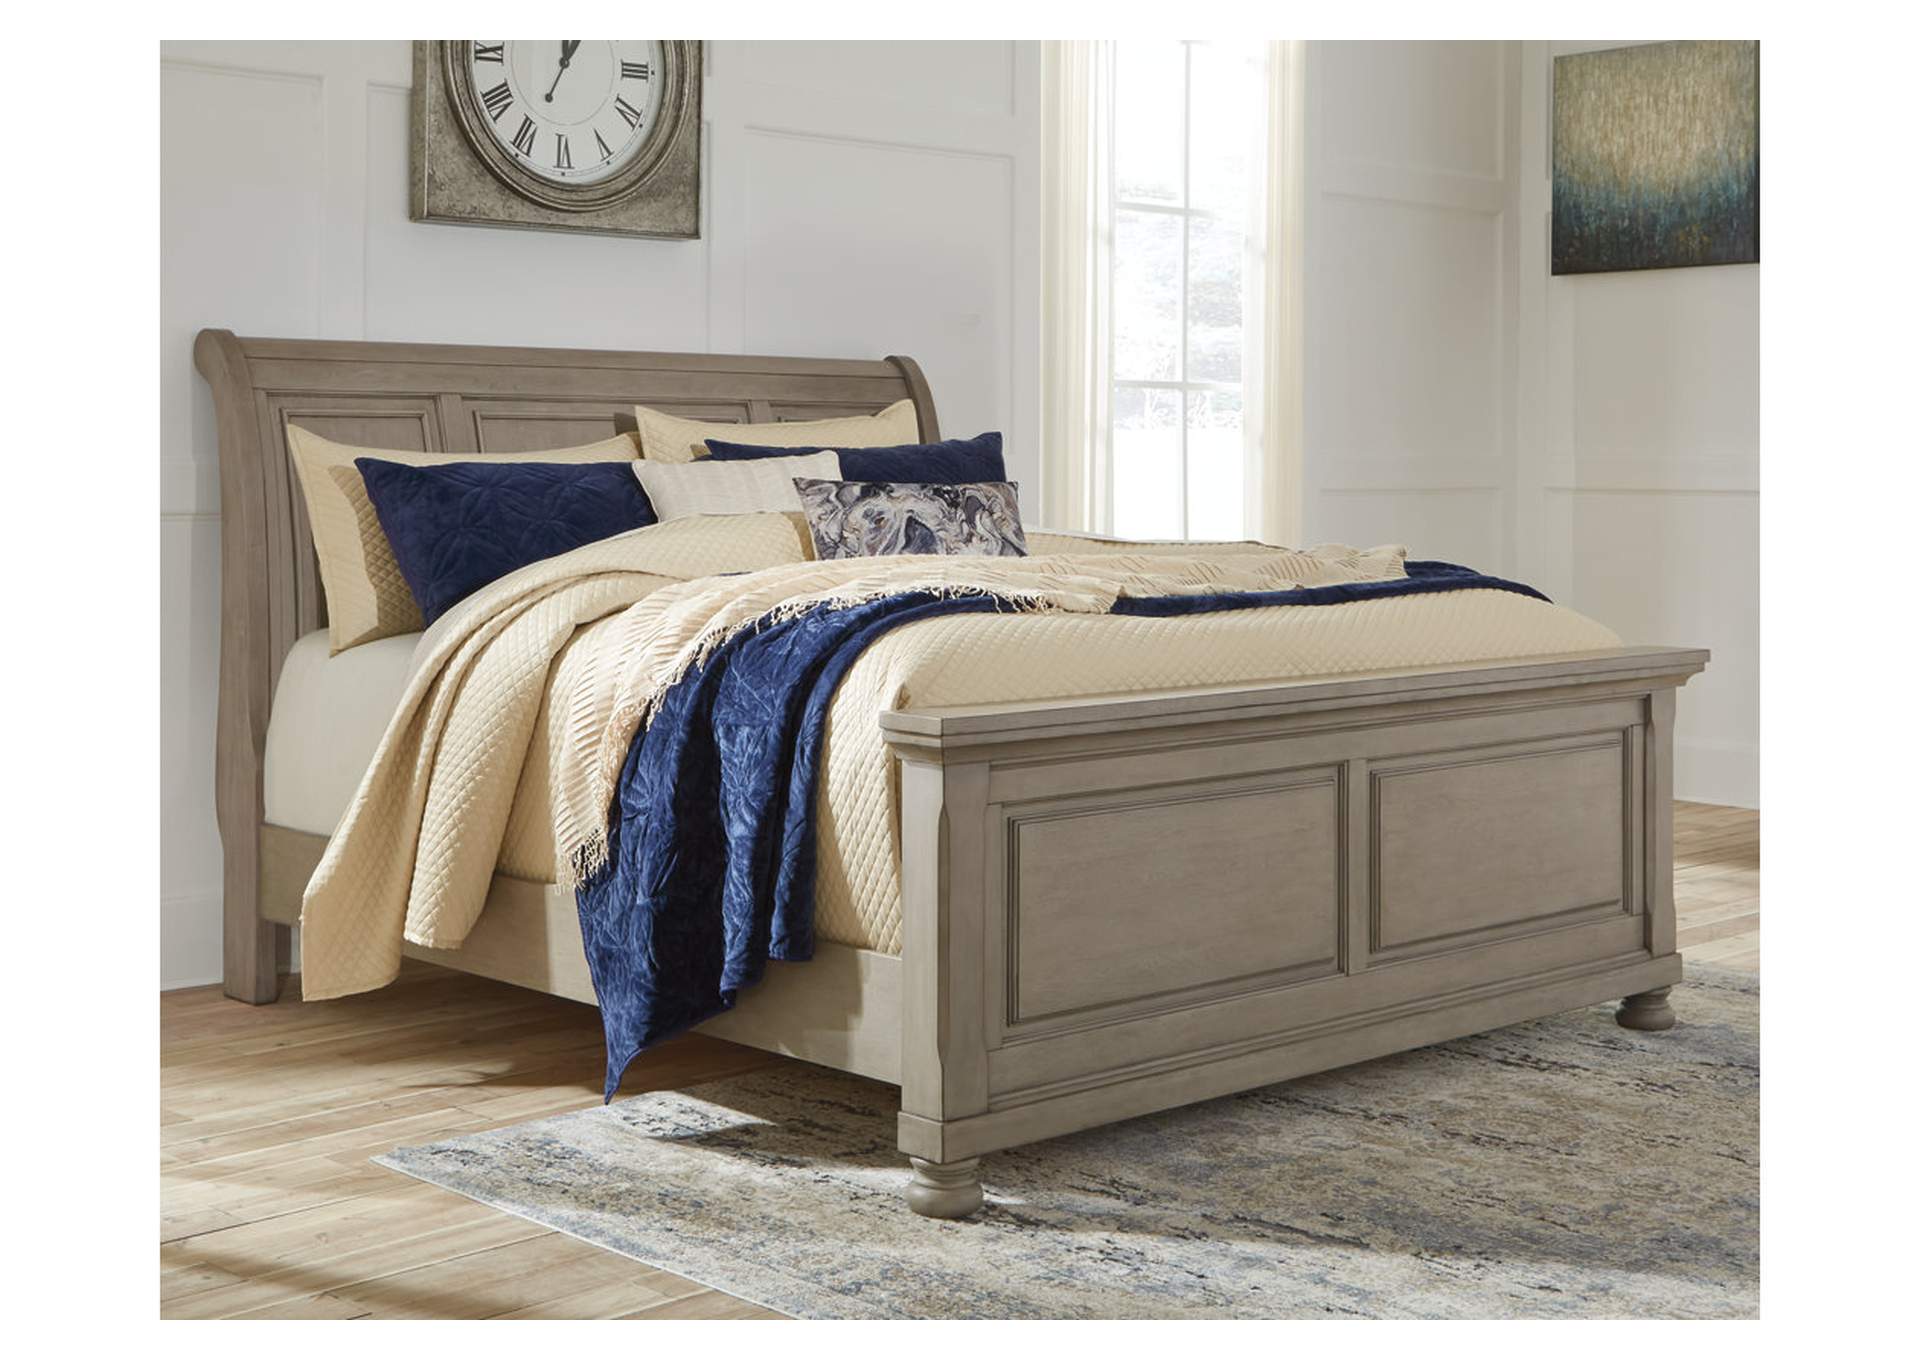 Lettner King Sleigh Bed,Signature Design By Ashley